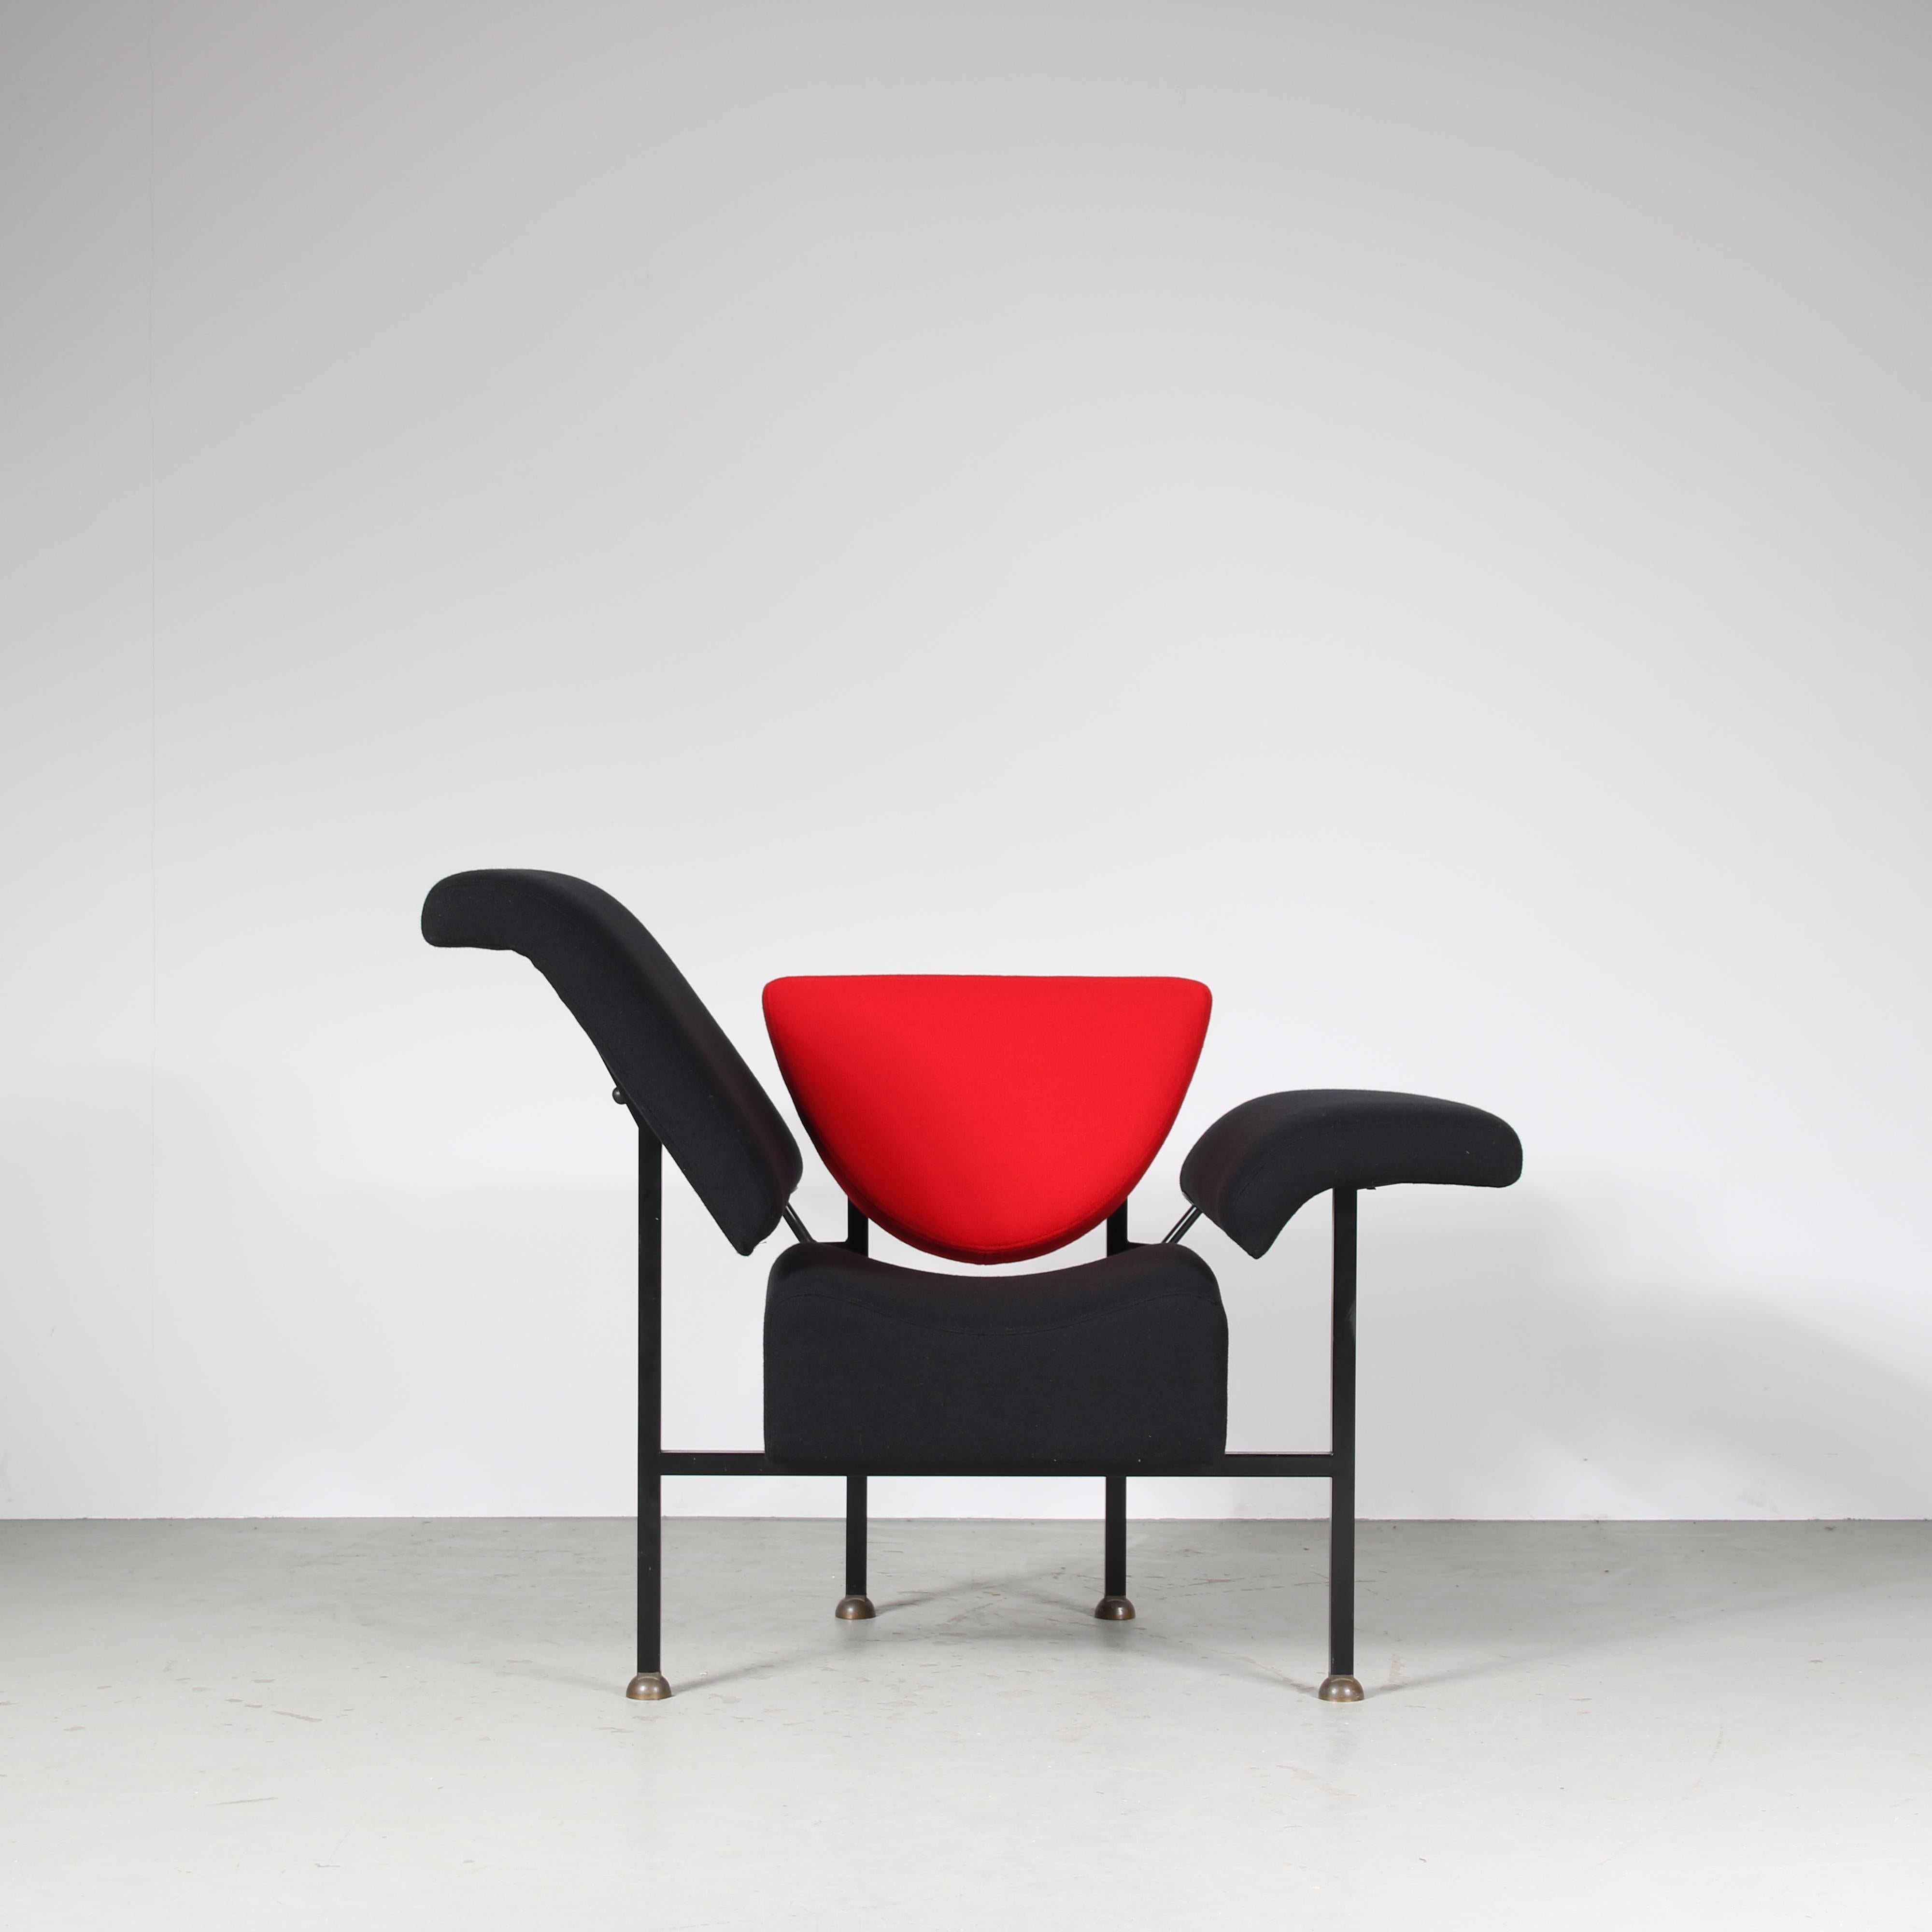 The “Groeten uit Holland” (Greetings from Holland) chair is an iconic design by Rob Eckhardt, manufactured by Pastoe in the Netherlands around 1980.

Inspired by the Dutch tulip, this asymmetrical chair has an eye-catching style! It is newly